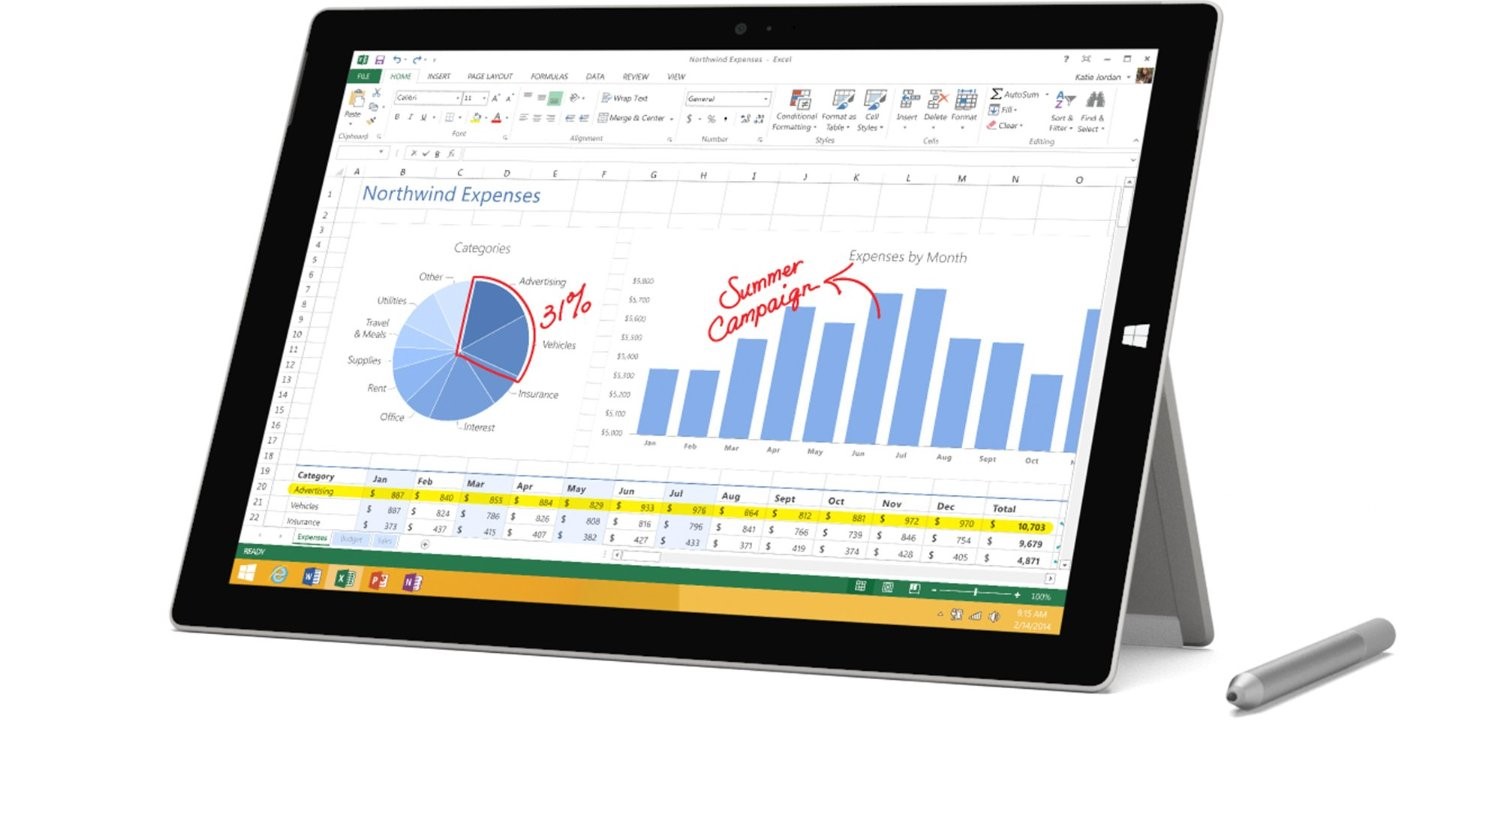 microsoft surface pro 3 tablet (12-inch, 128 gb, intel core i3, windows 10) - image 2 of 15